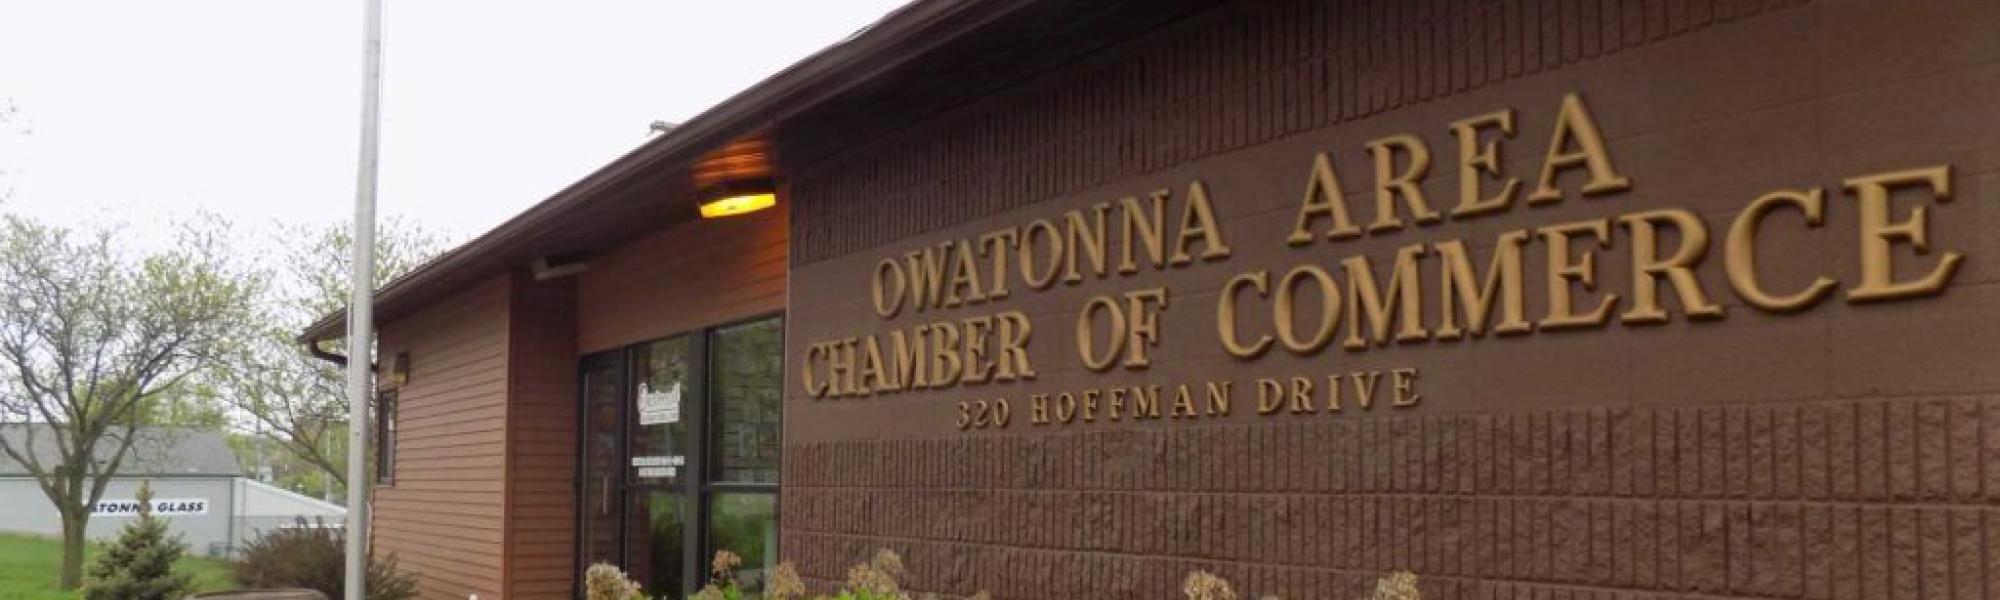 Owatonna Area Chamber of Commerce